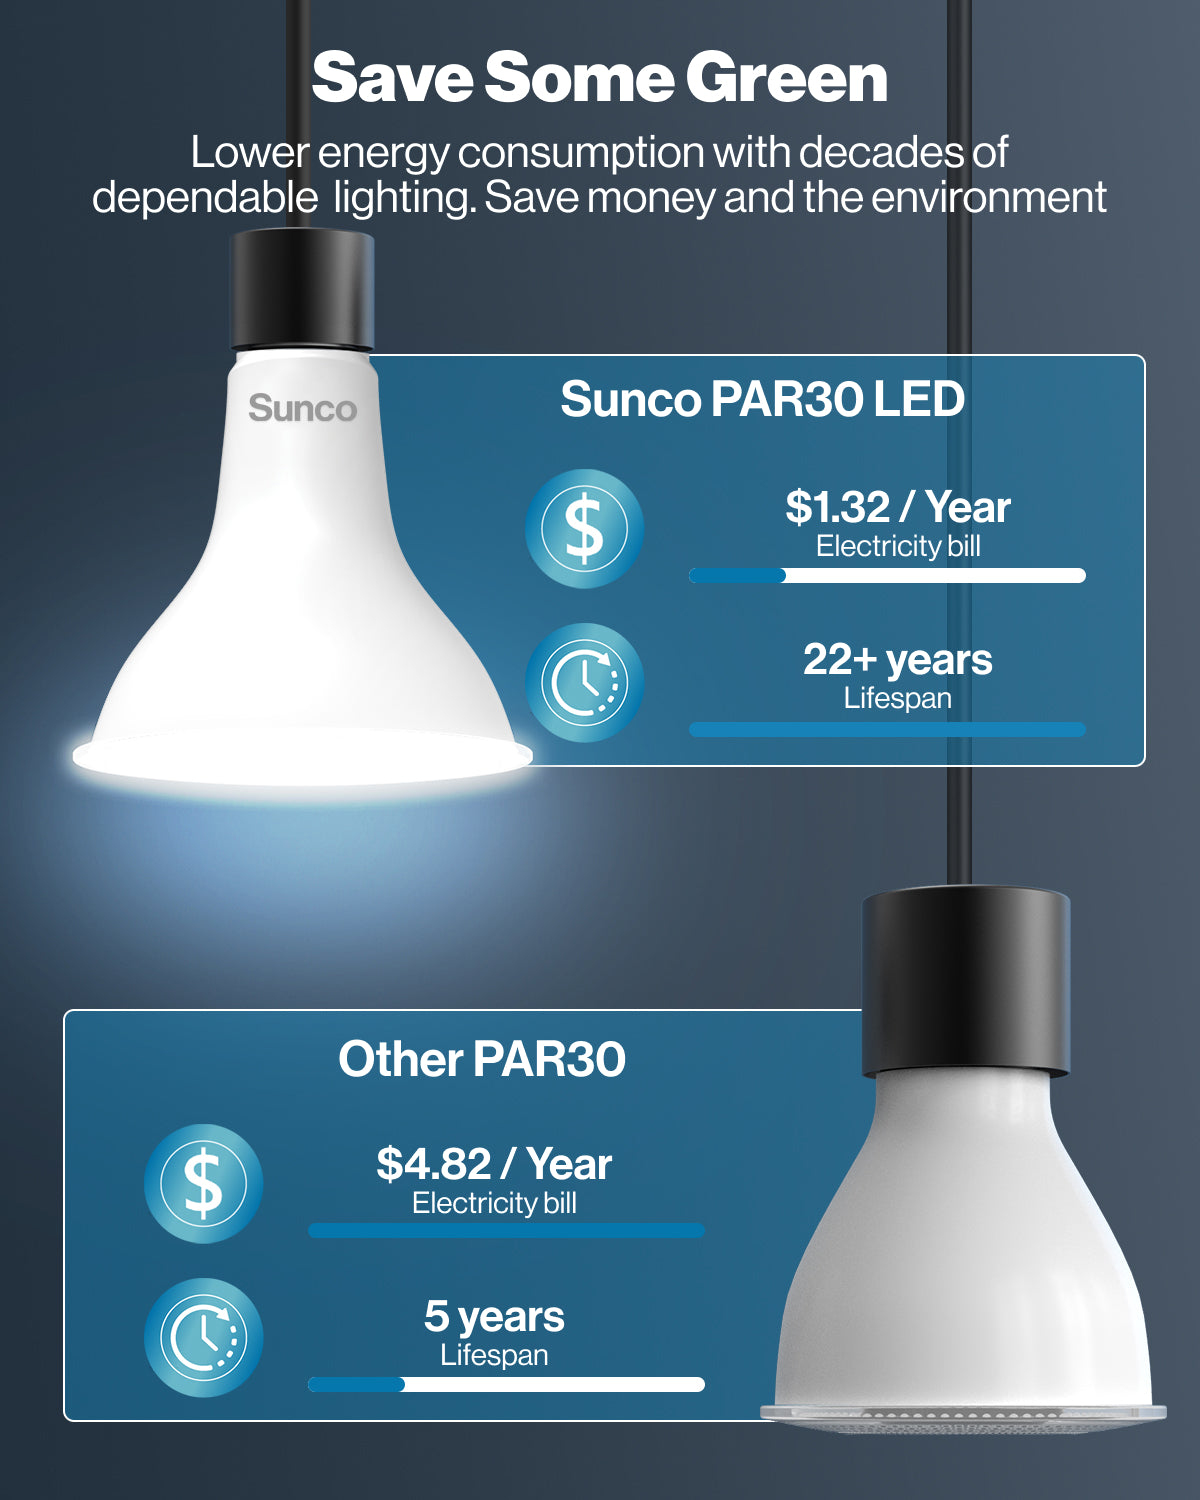 By going green on lighting, you not only reduce your carbon footprint but also save on energy costs. Our energy-efficient LED lights consume significantly less electricity while providing the same level of brightness and quality as traditional bulbs.